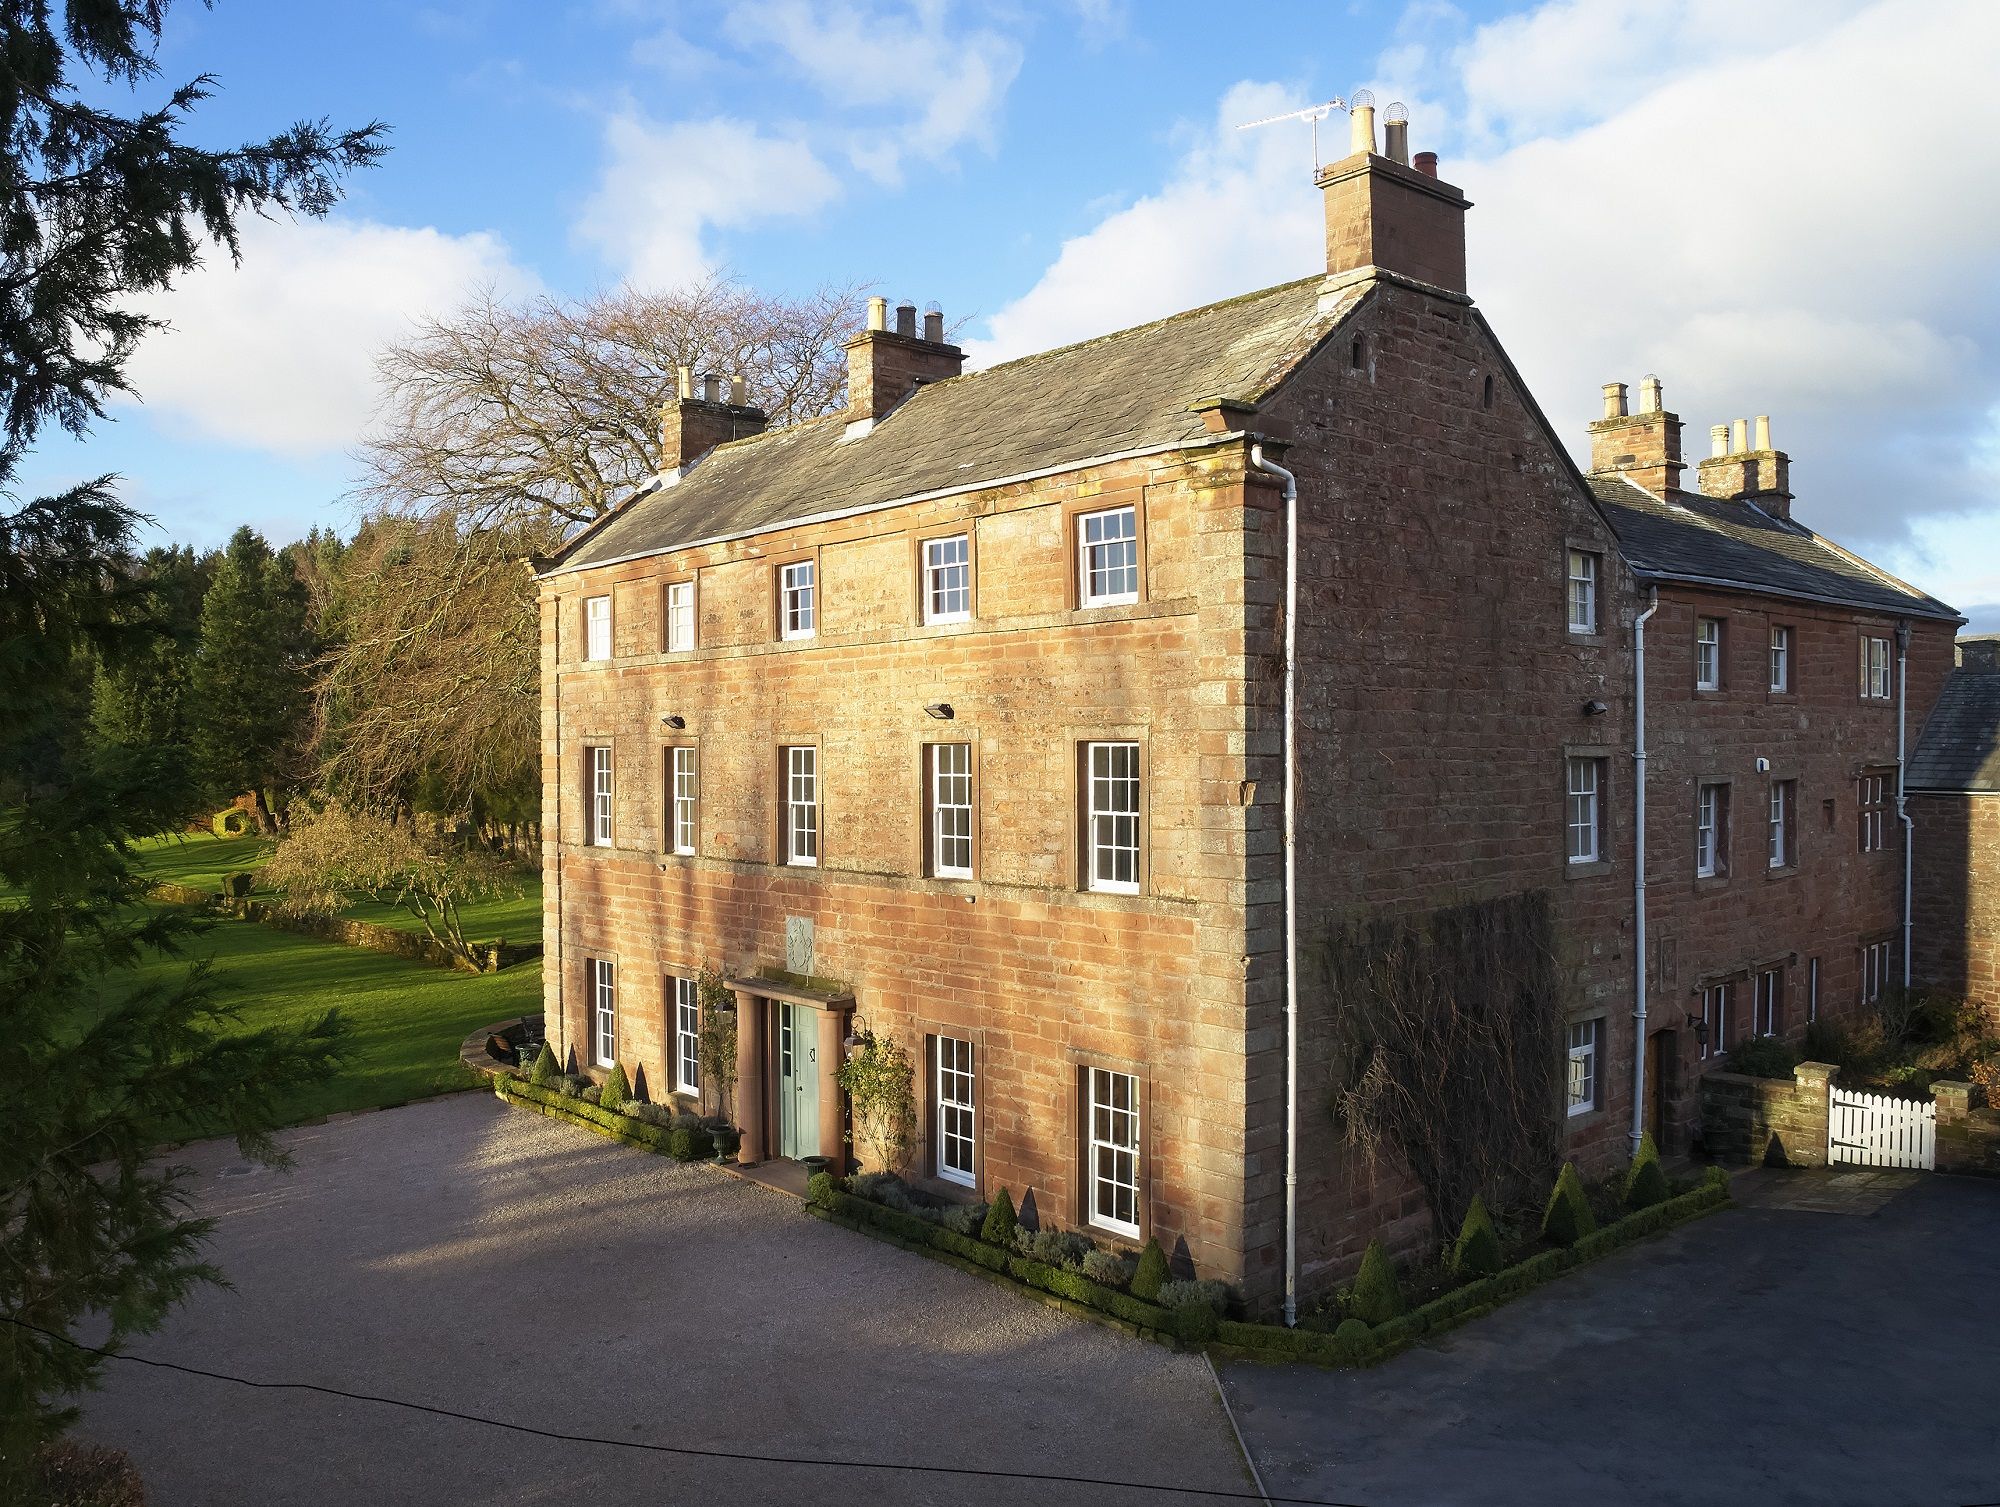 Melmerby Hall luxury holiday self catering home near Lake District exclusive use venue for family holidays wedding venue corporate breaks dogs welcome